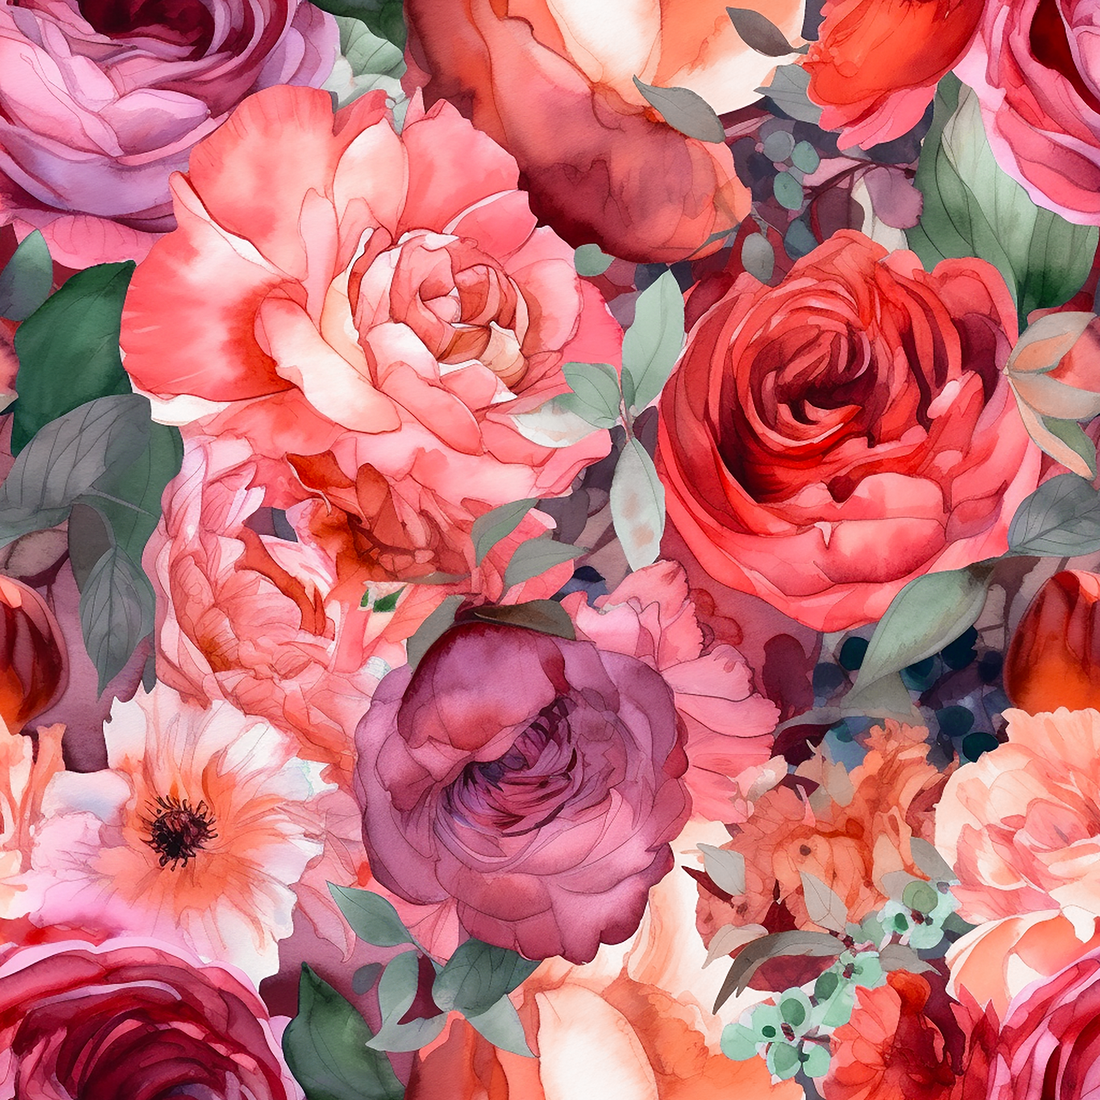 Captivating Roses in Full Bloom: Introducing Three Exquisite Watercolor Fabric Patterns